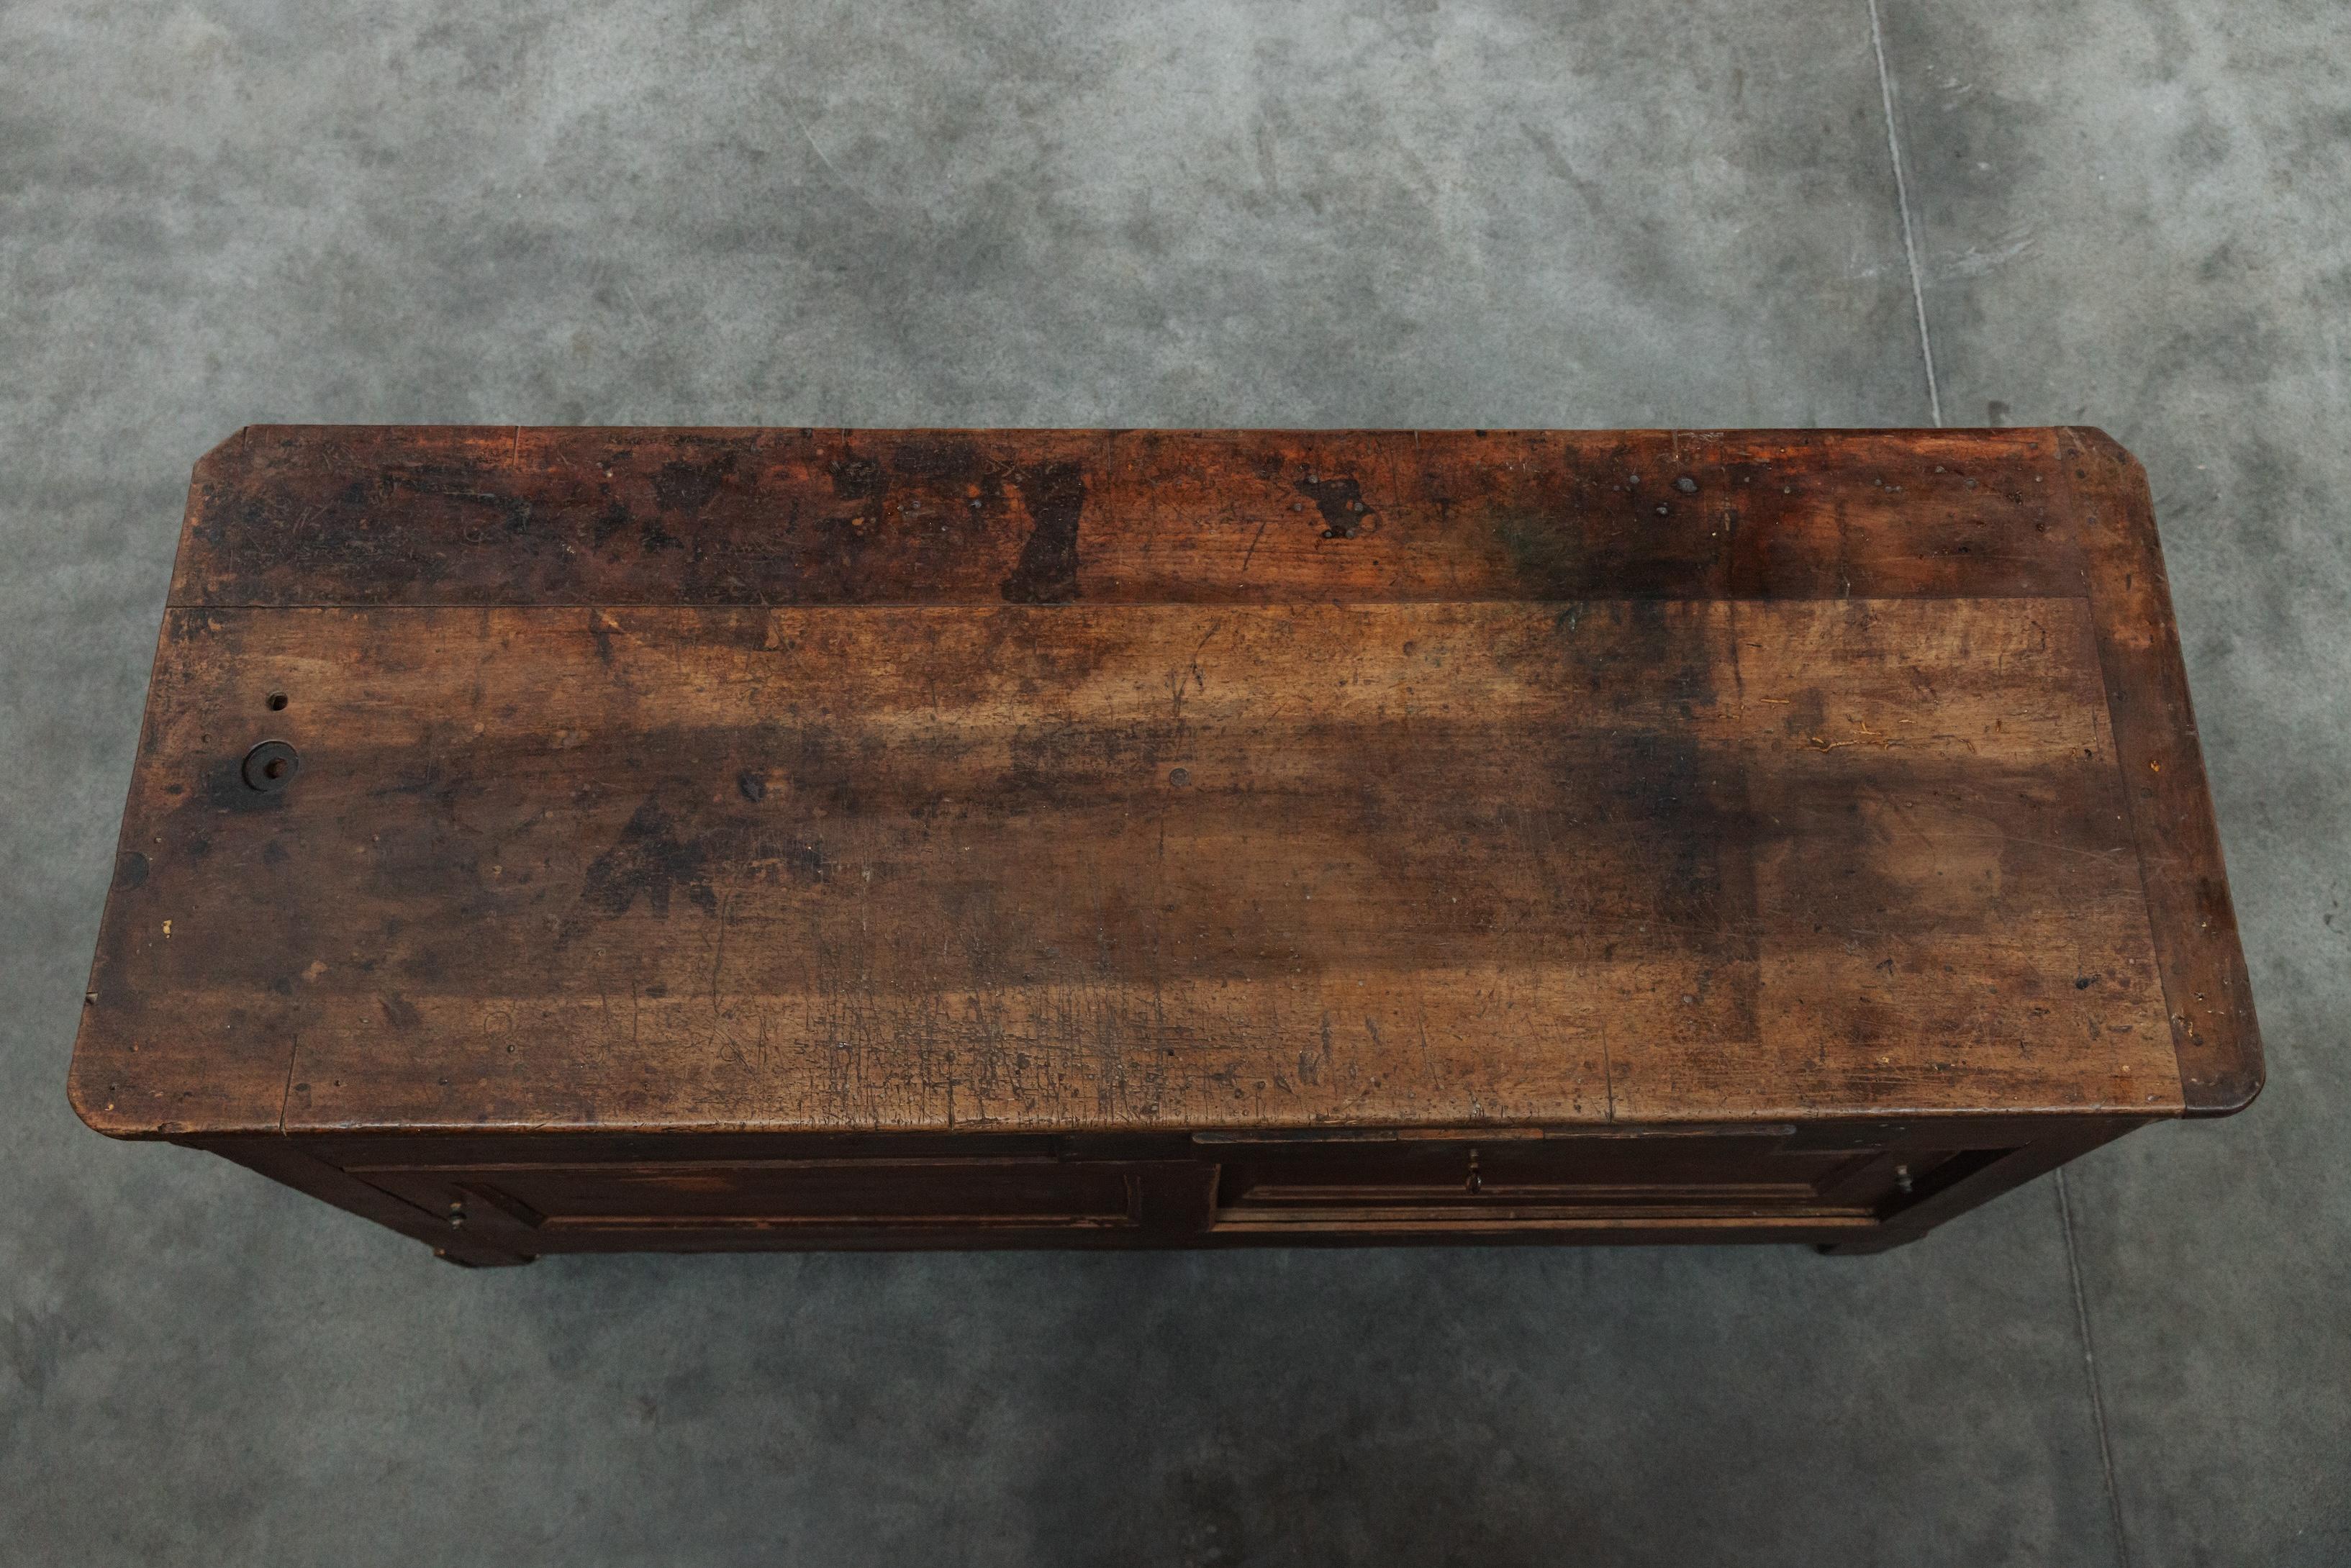 Early Pine Shop Counter From France, Circa 1900.  Superb model with original hand painted sign on front.  Solid pine construction with original hardware and patina.